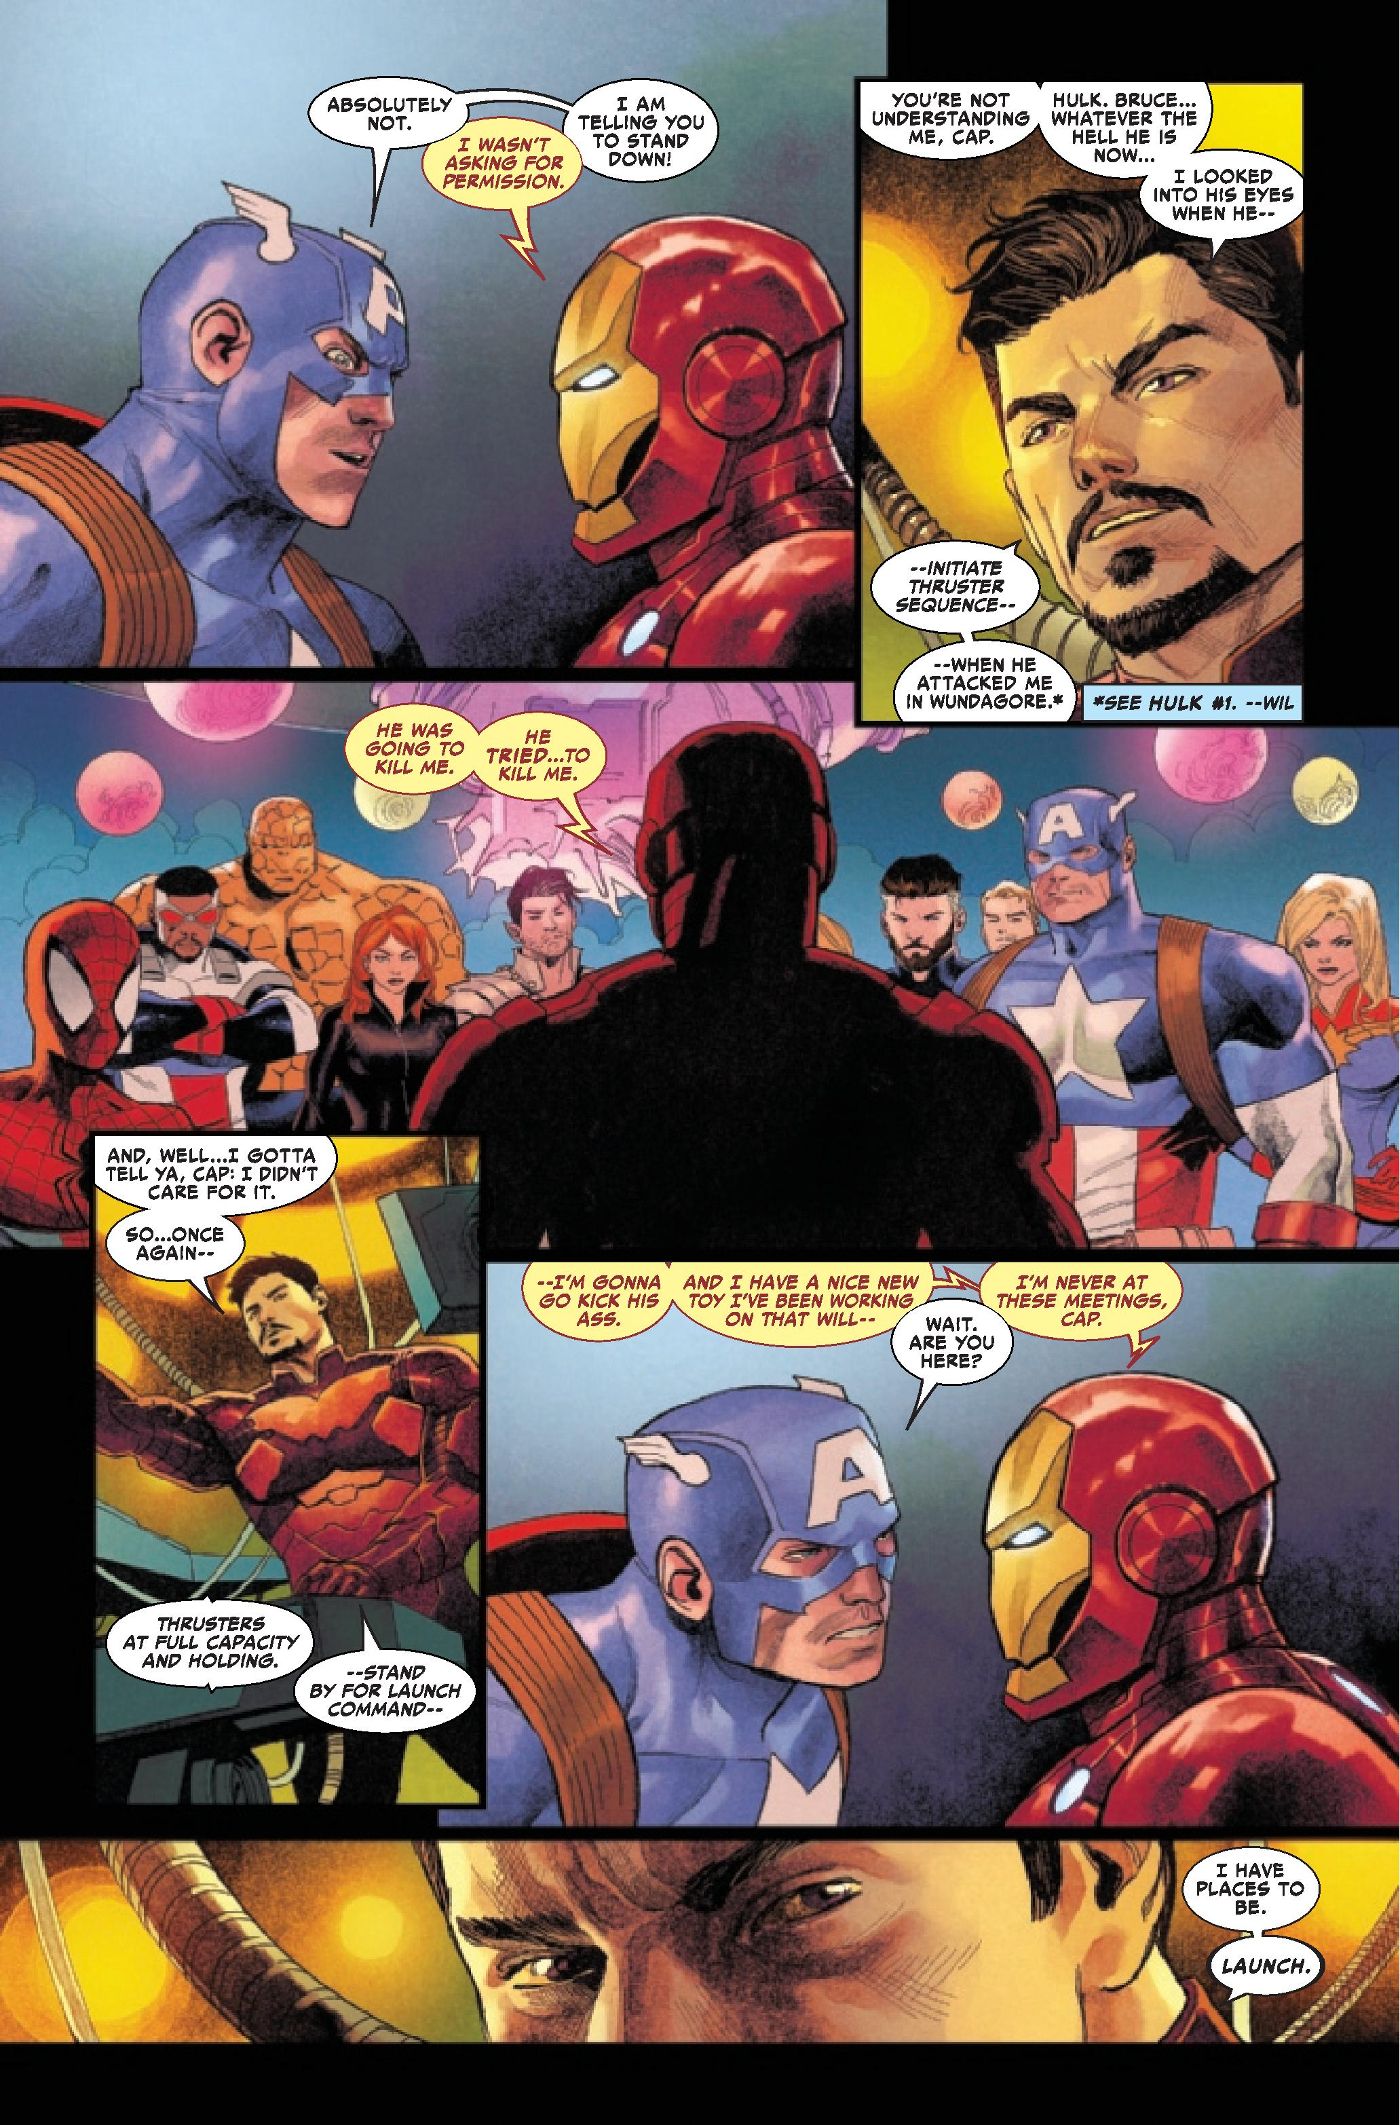 Thor 25 Iron Man discussing with other heroes